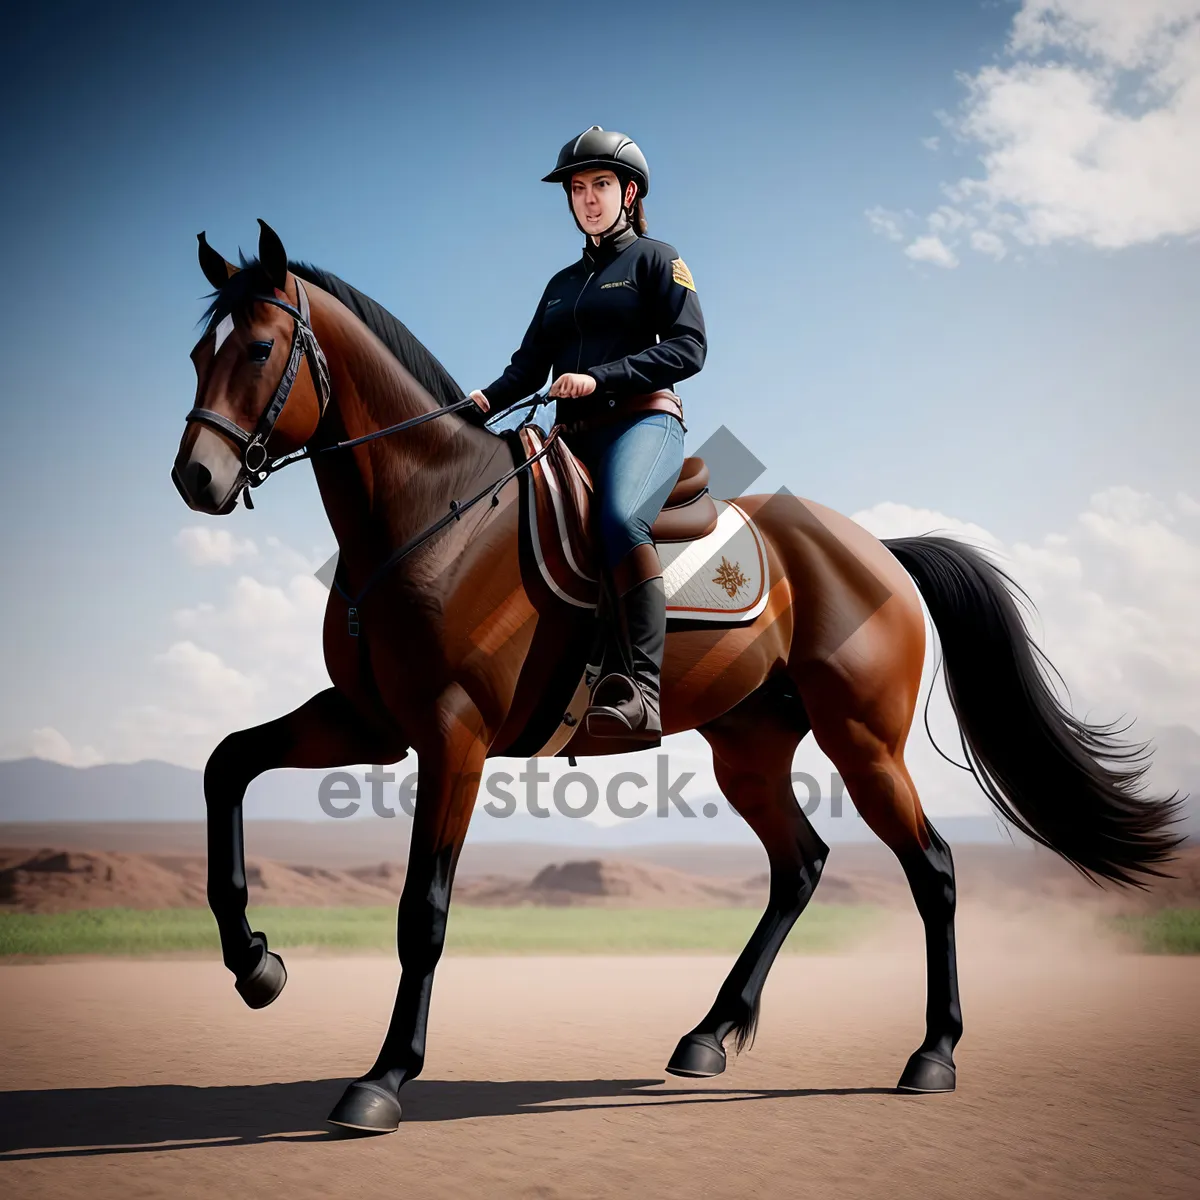 Picture of Professional Jockey Riding Thoroughbred Stallion in Horseback Race